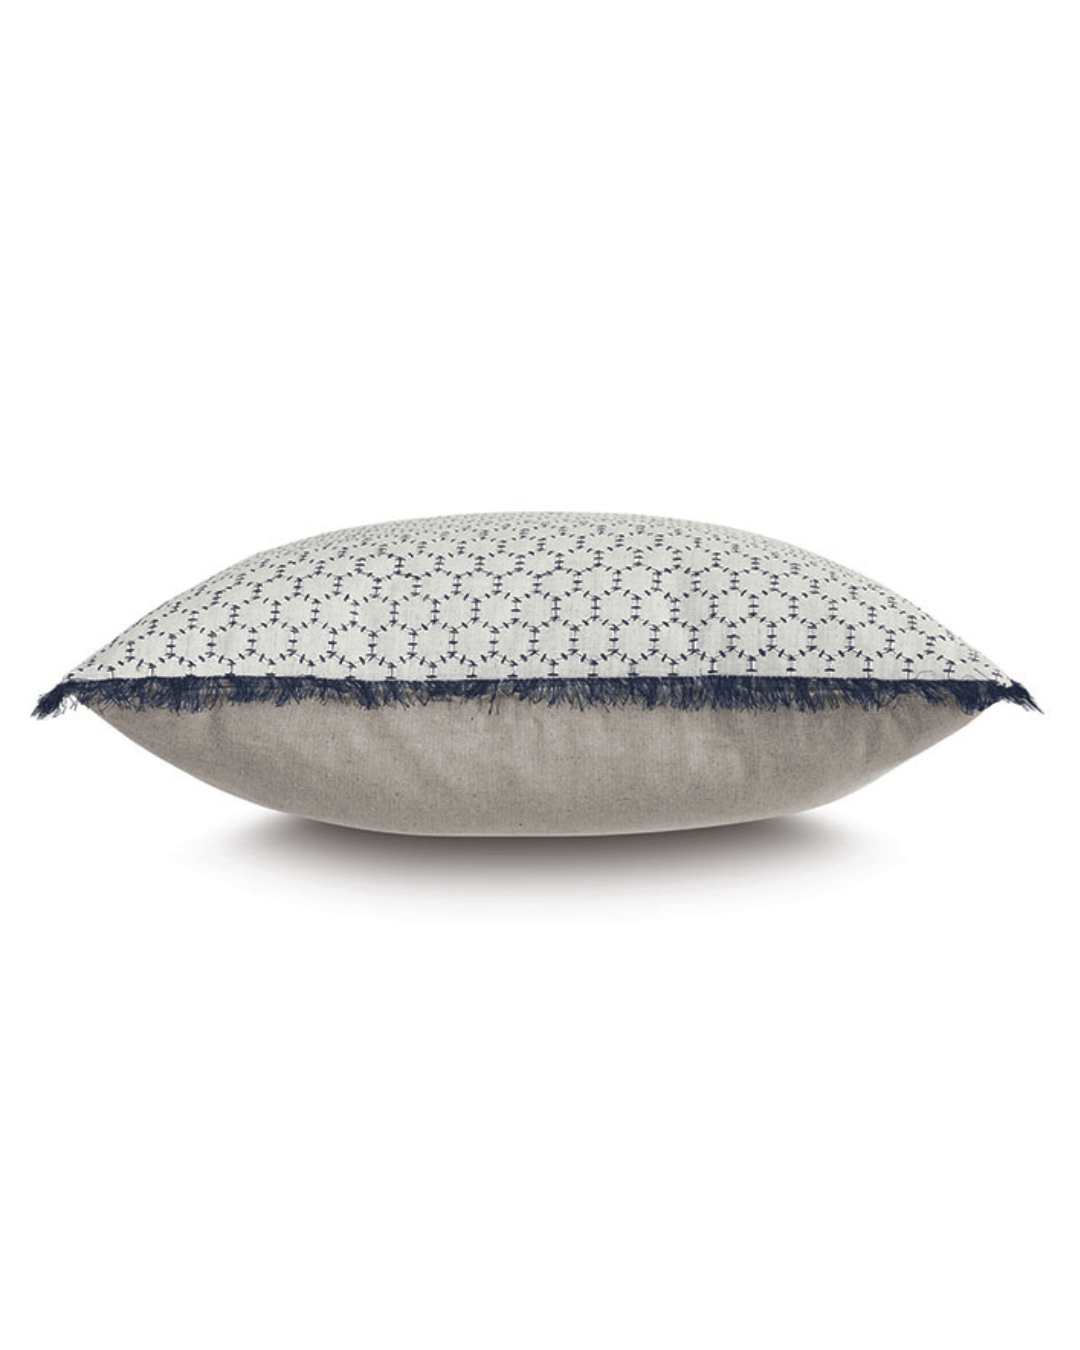 A Bea Embroidered Pillow by Eastern Accents with a geometric pattern on the top half and a solid denim-like fabric on the bottom half, set against a white background, showcasing Arizona style.